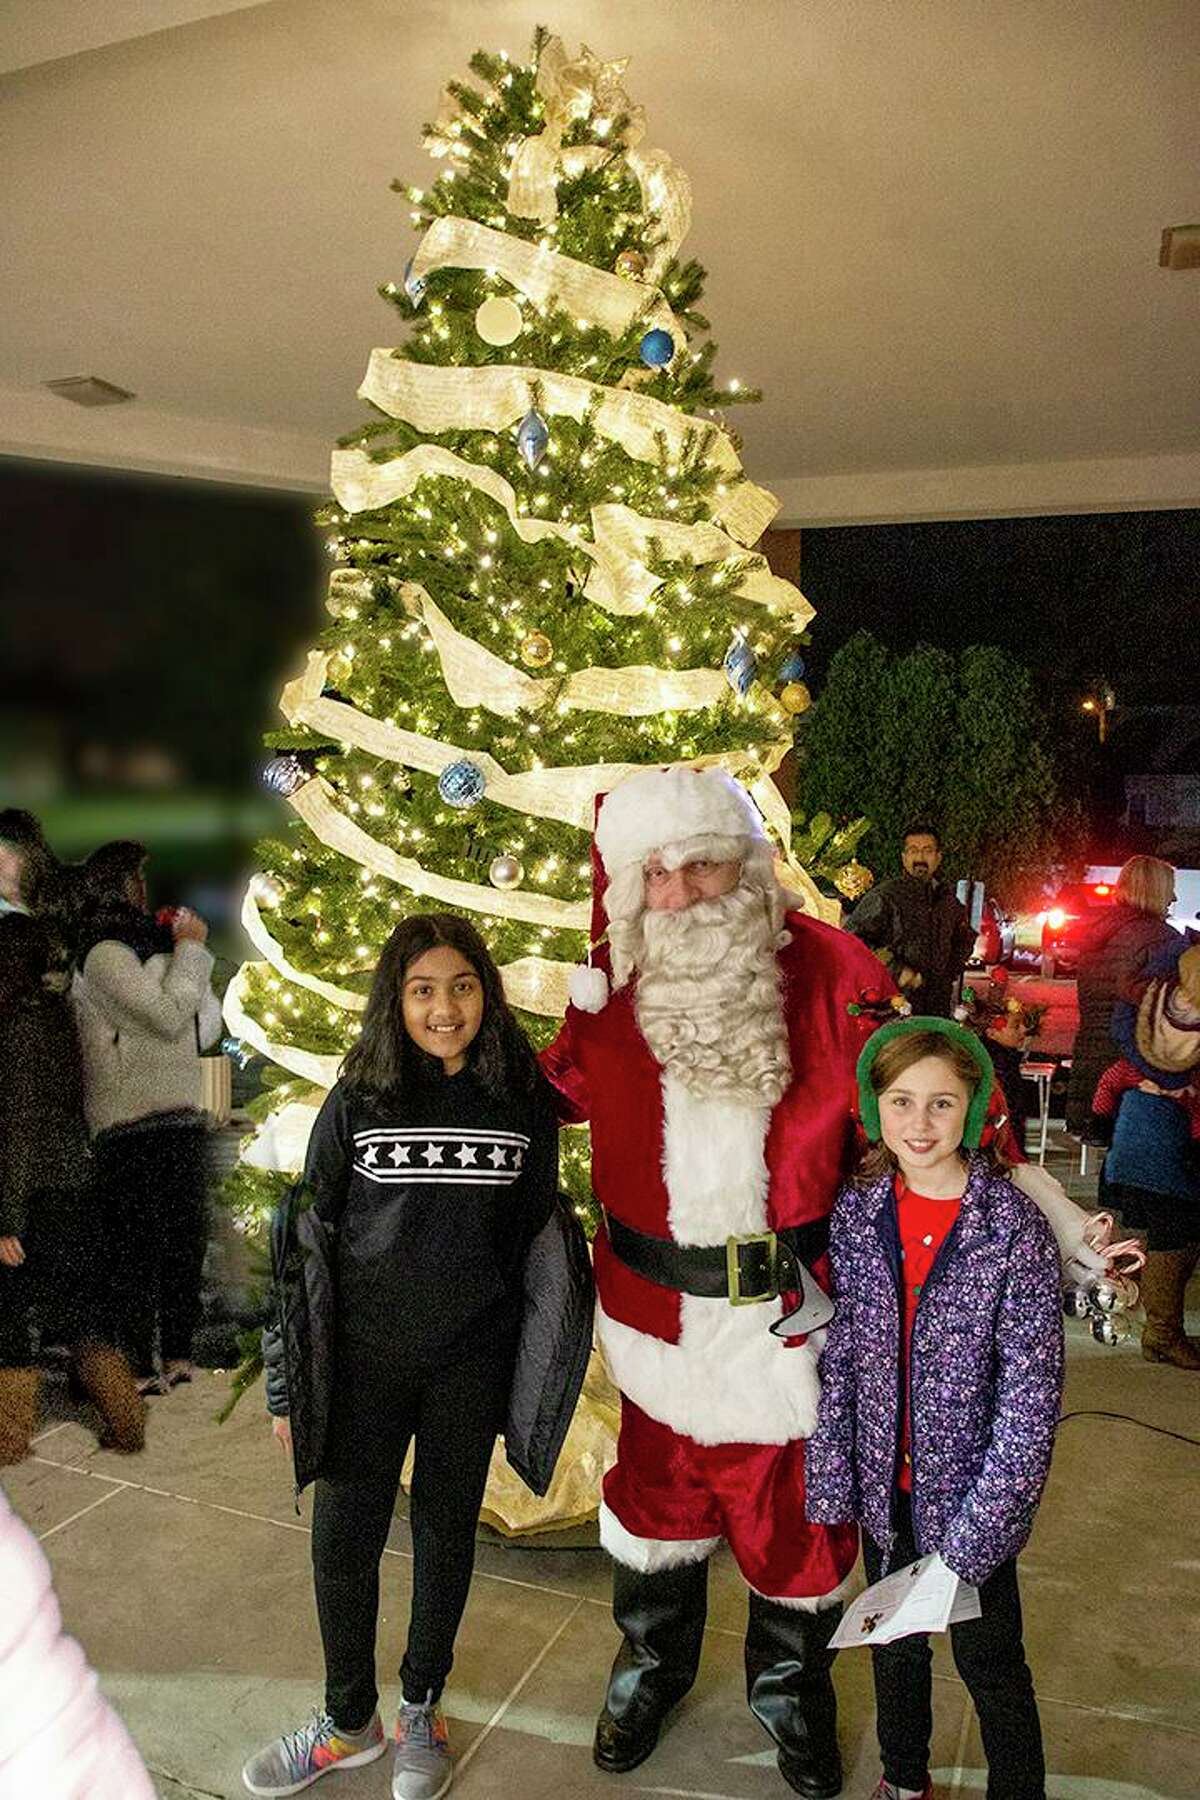 Santa Claus (played by  a member of St. George’s Knights of Columbus Council 3928) suprised East Shoreline Catholic Academy’s students at a Christmas tree lighting event held Dec. 4.